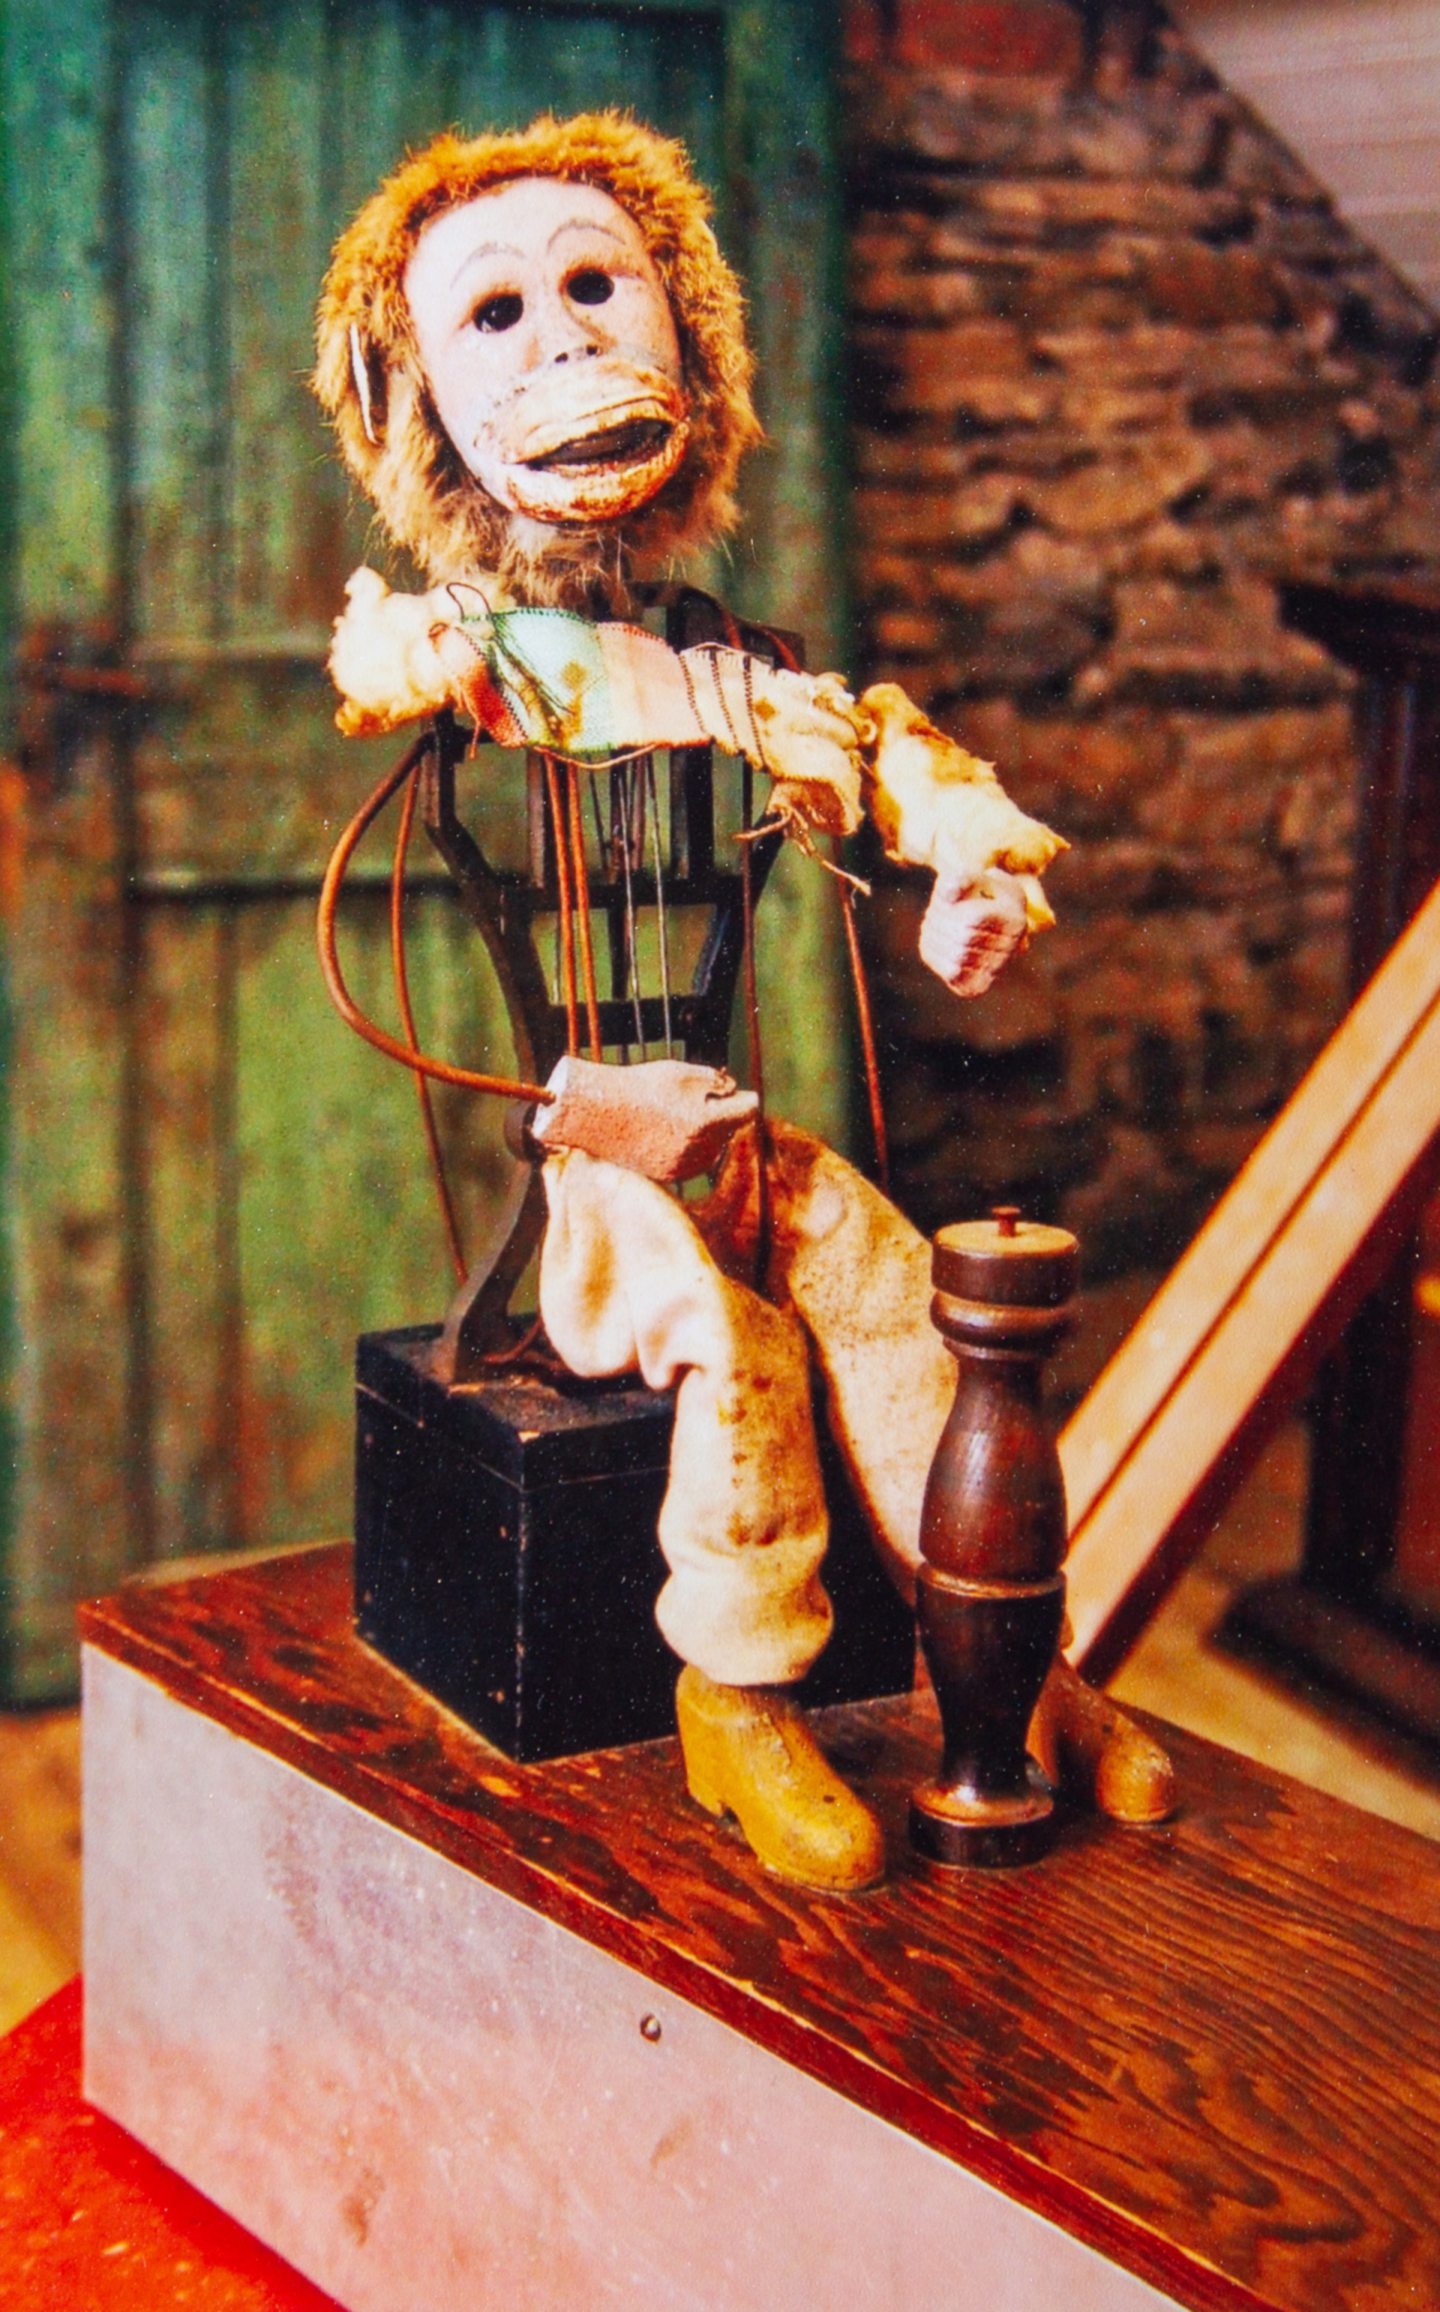 A surviving Peter Pan monkey which has seen better days.